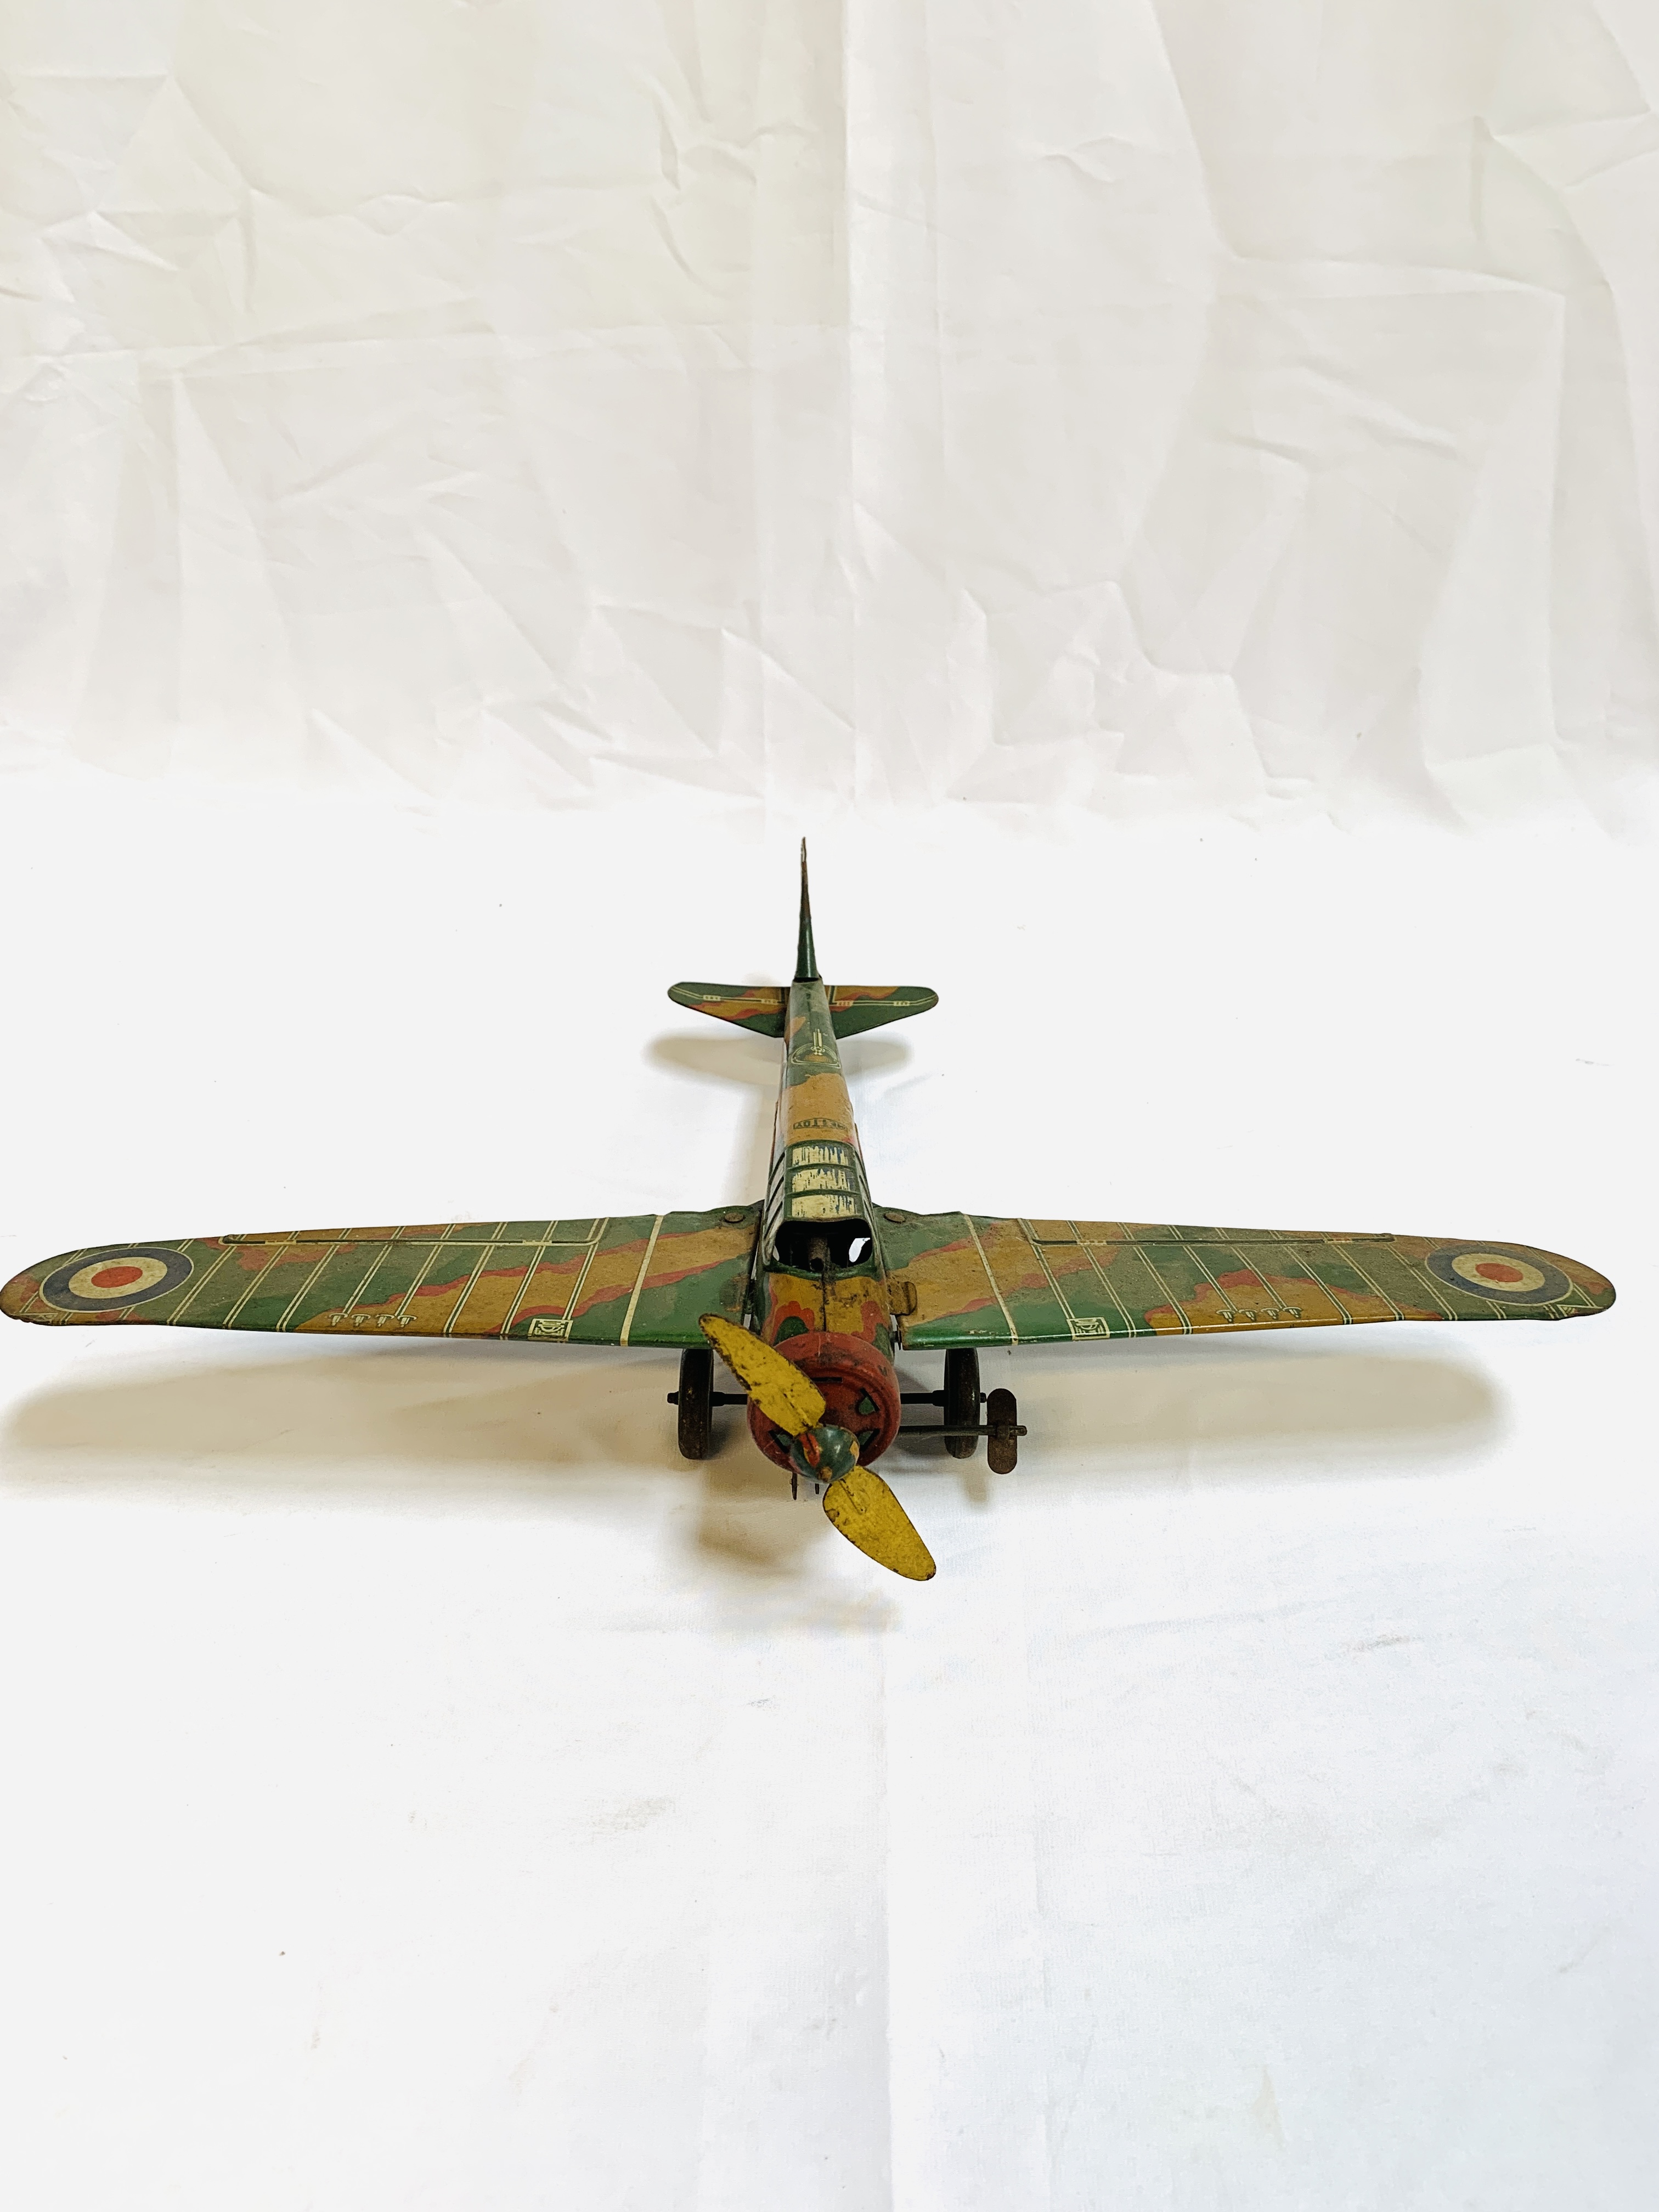 Mettoy tinplate clockwork propellor 'plane with folding wings - Image 2 of 5